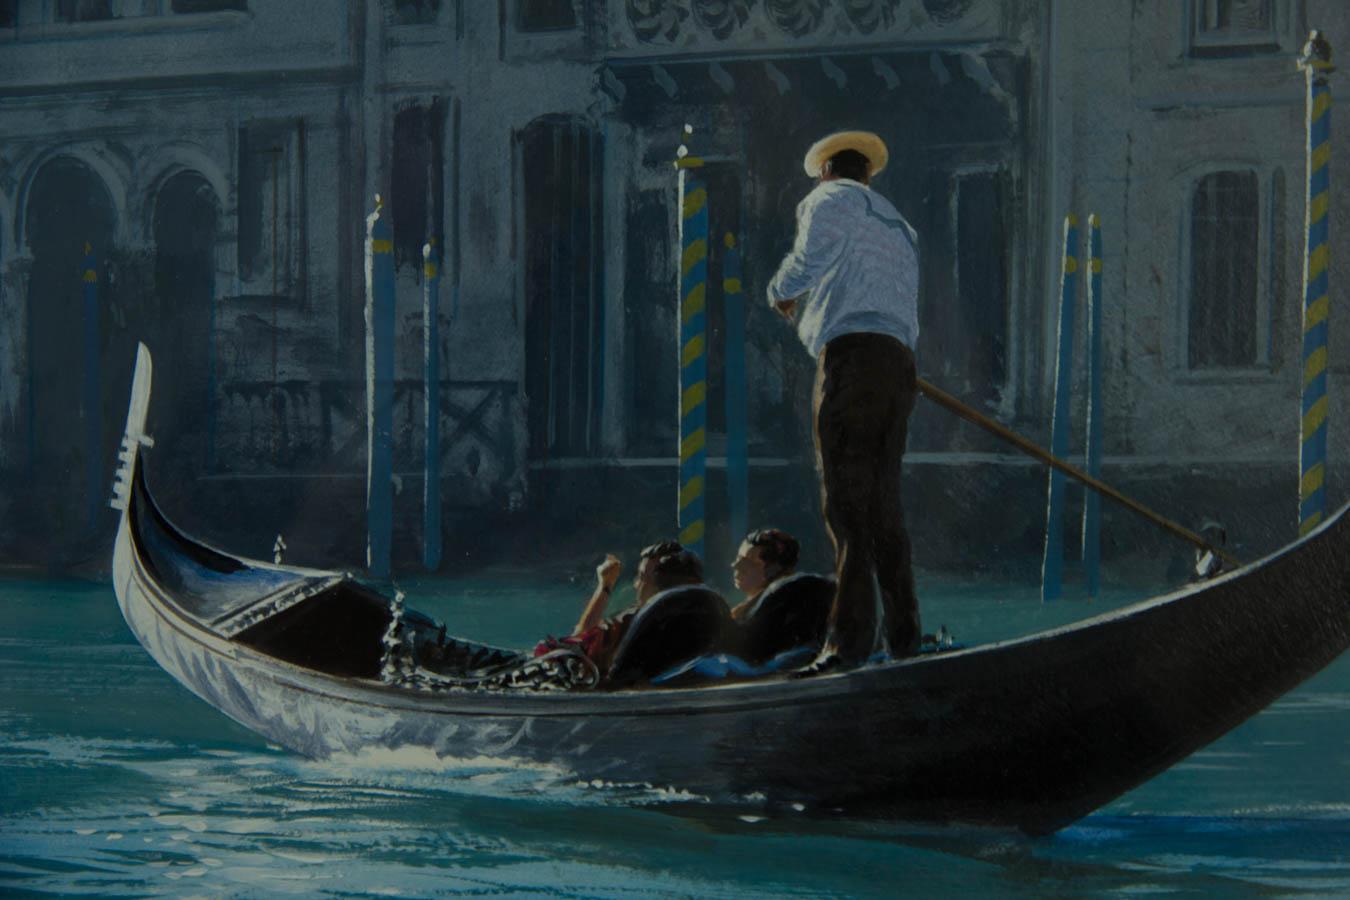 Differing from Mcphail's usual subject of nature and wildlife, 'On the Grand Canal' captures a relaxing and scenic rendition of The Grand Canal, Venice. Mcphail's tight brushwork and intricate detail transports the viewer into his soft and